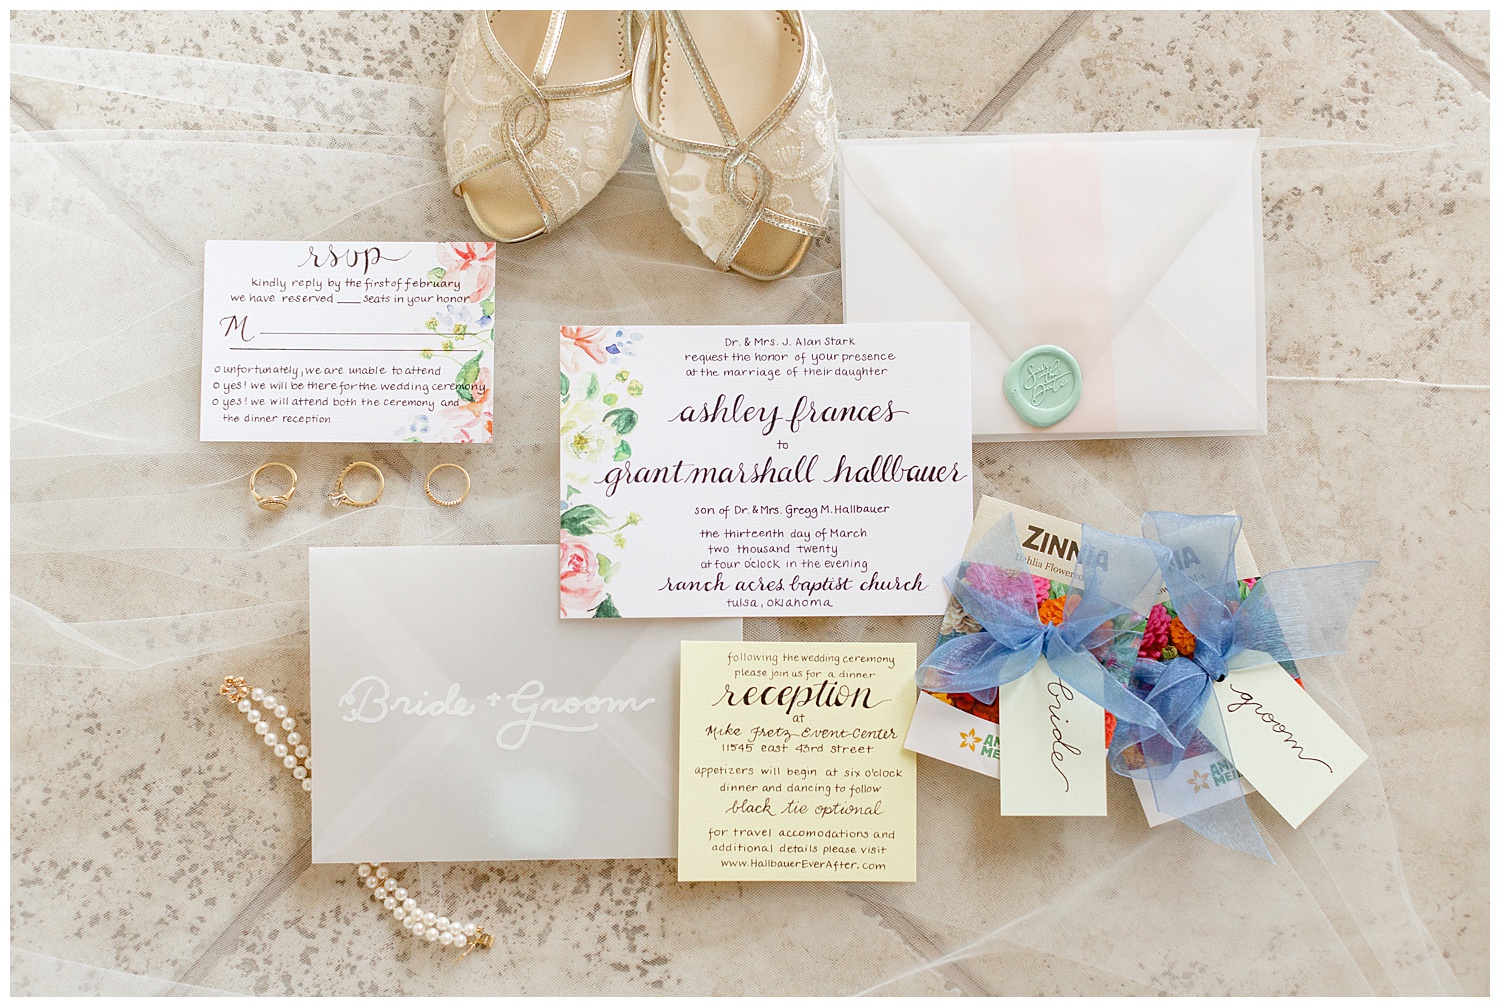 Pretty bridal details with invitation suite and jewelry.